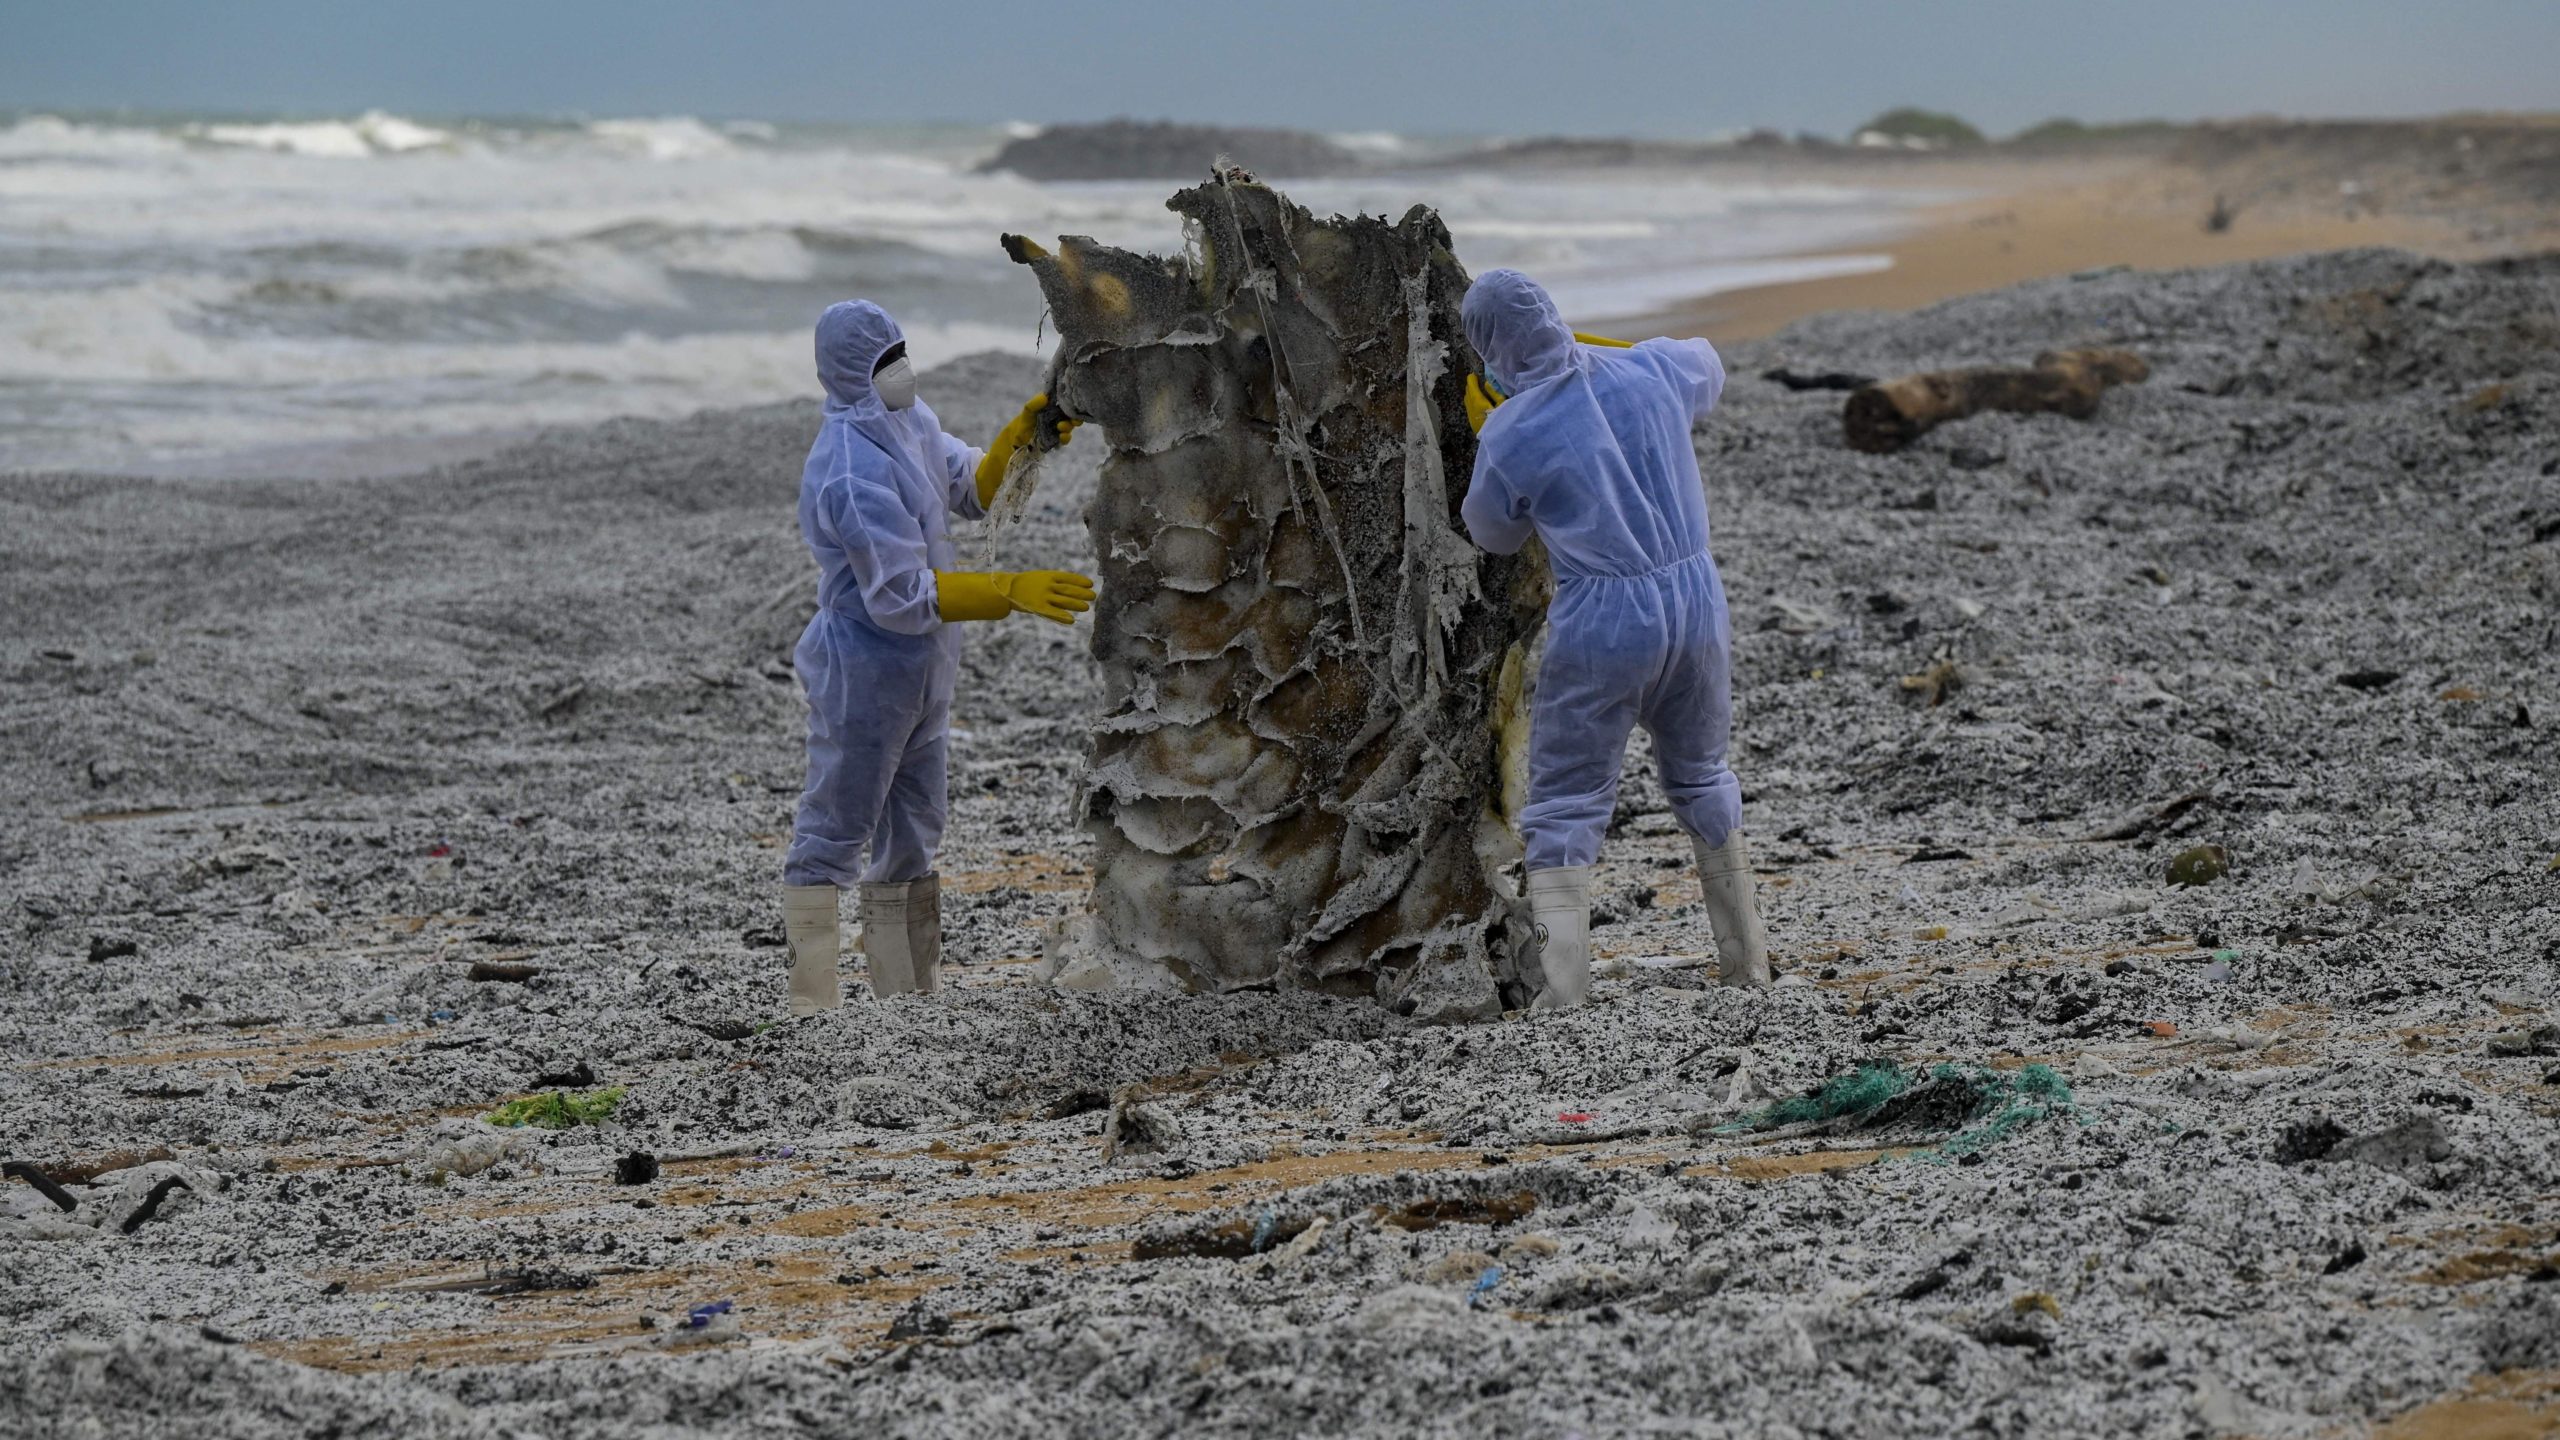 Sri Lankan Navy soldiers work among a sea of plastic to remove debris washed ashore from the MV X-Press Pearl on May 28. (Photo: Ishara S. Kodikara/AFP, Getty Images)